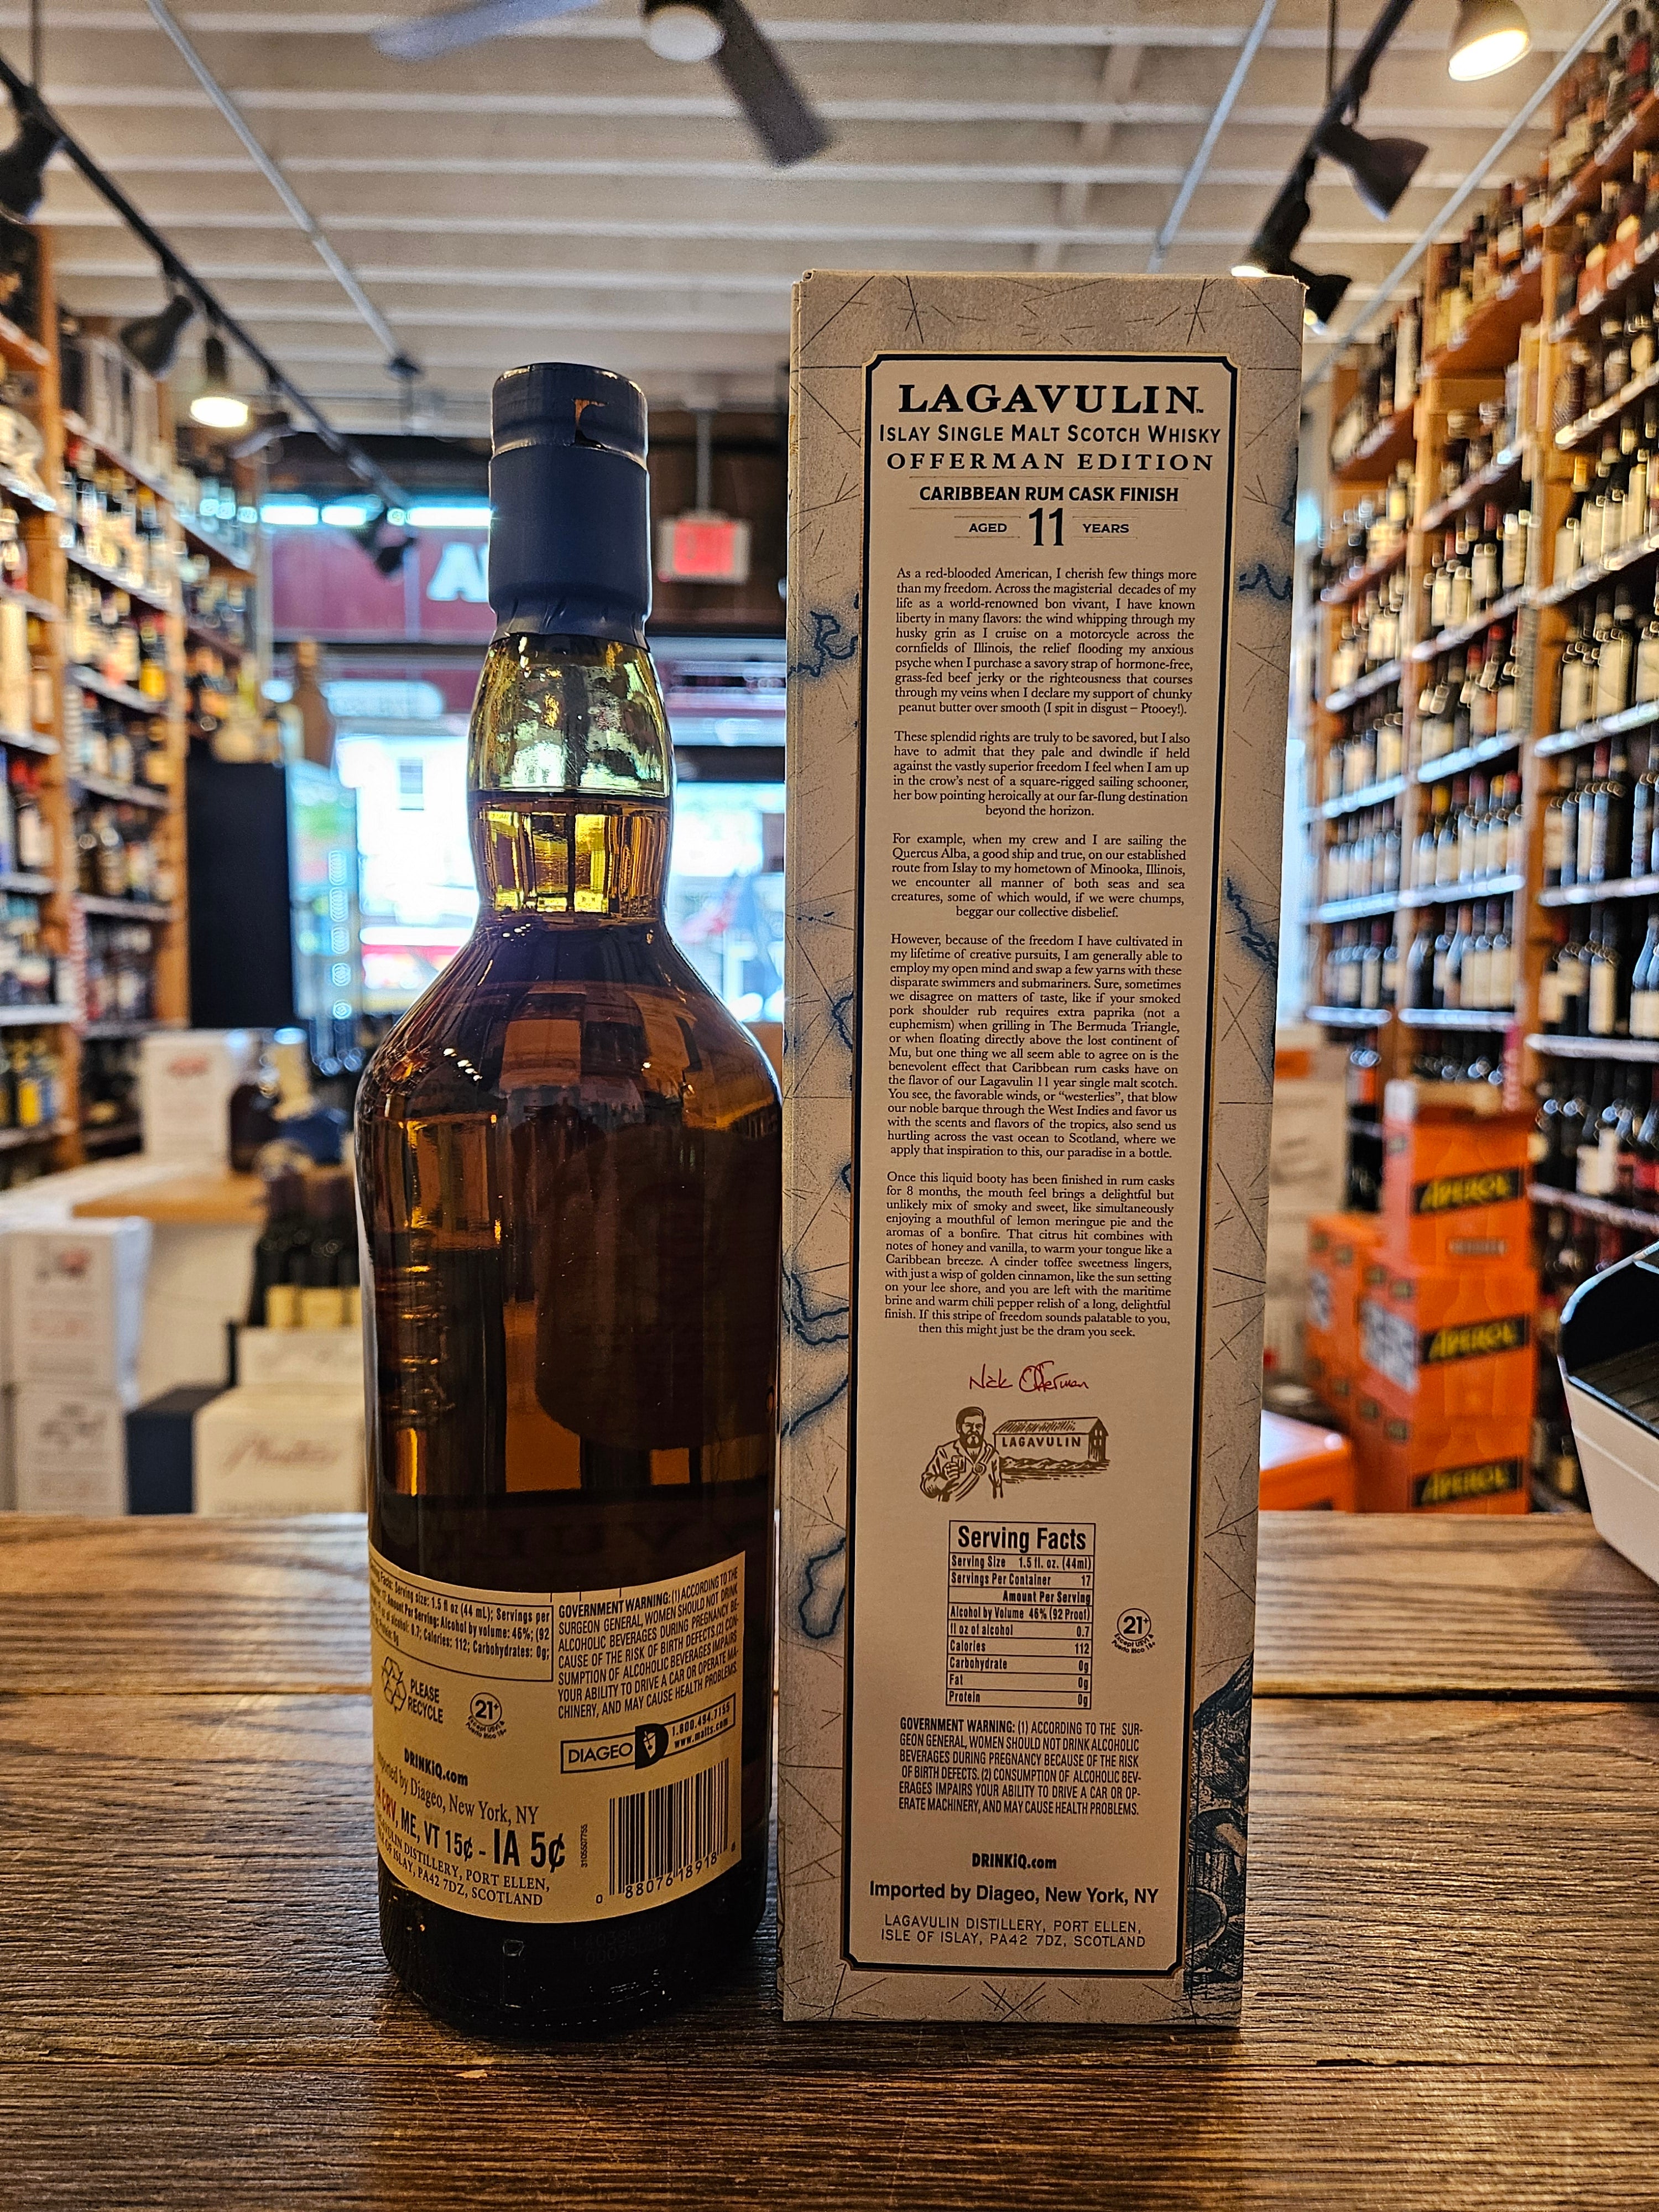 Lagavulin 11 Year Offerman Edition Caribbean Rum Cask Finish Single Malt Scotch Whisky 750mL the backside of a clear glass bottle with a beige label and a blue top next to a tall rectangular white box with an atlas on it.